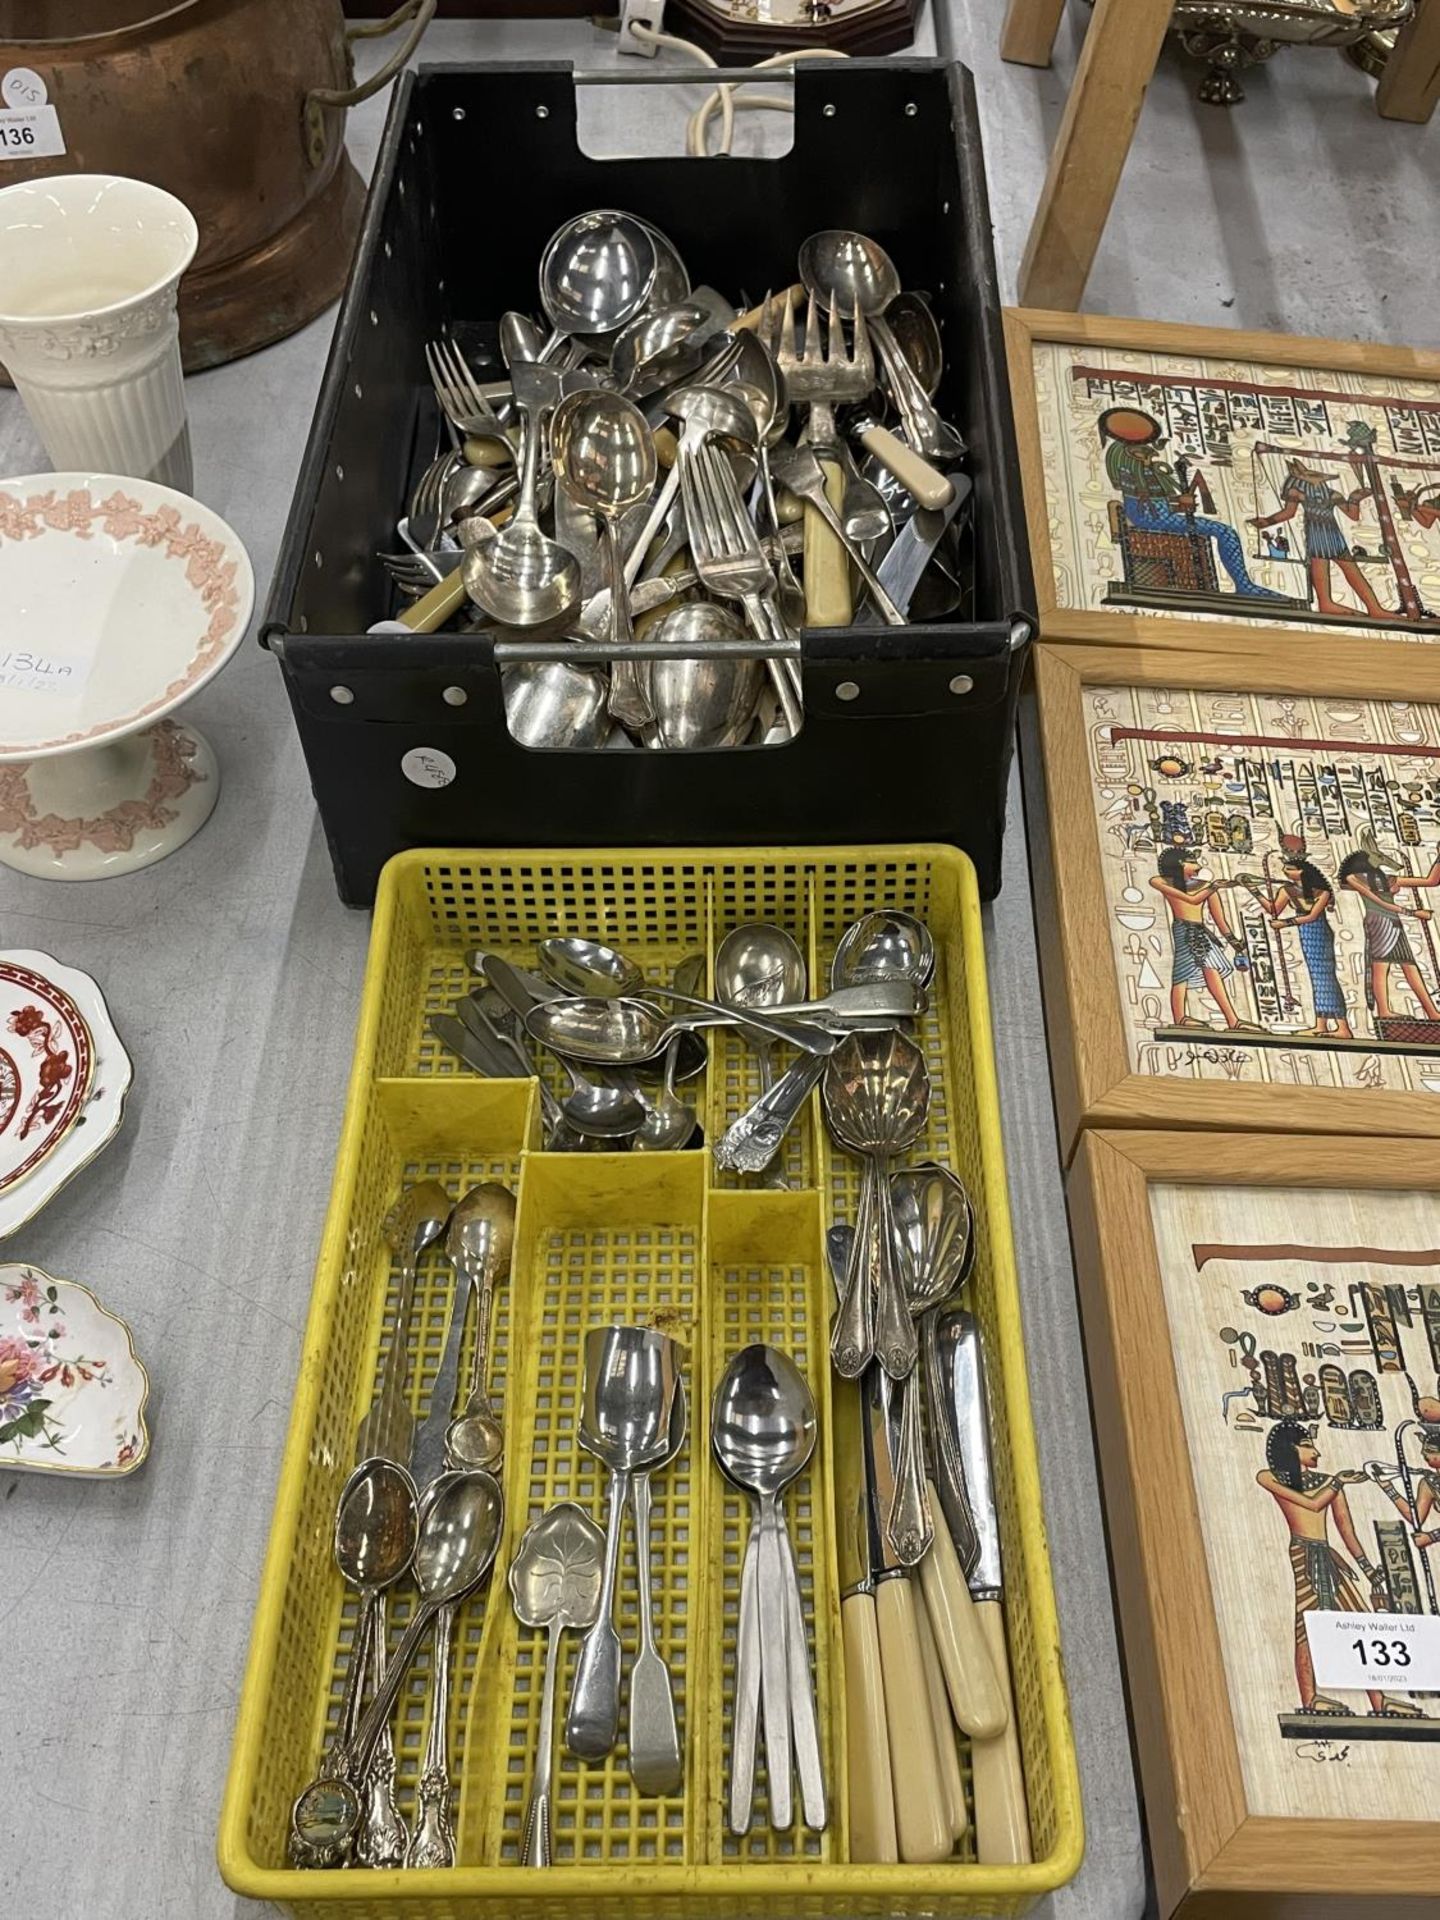 A LARGE QUANTITY OF VINTAGE FLATWARE TO INCLUDE KNIVES, FORKS, SPOONS, LADELS, ETC